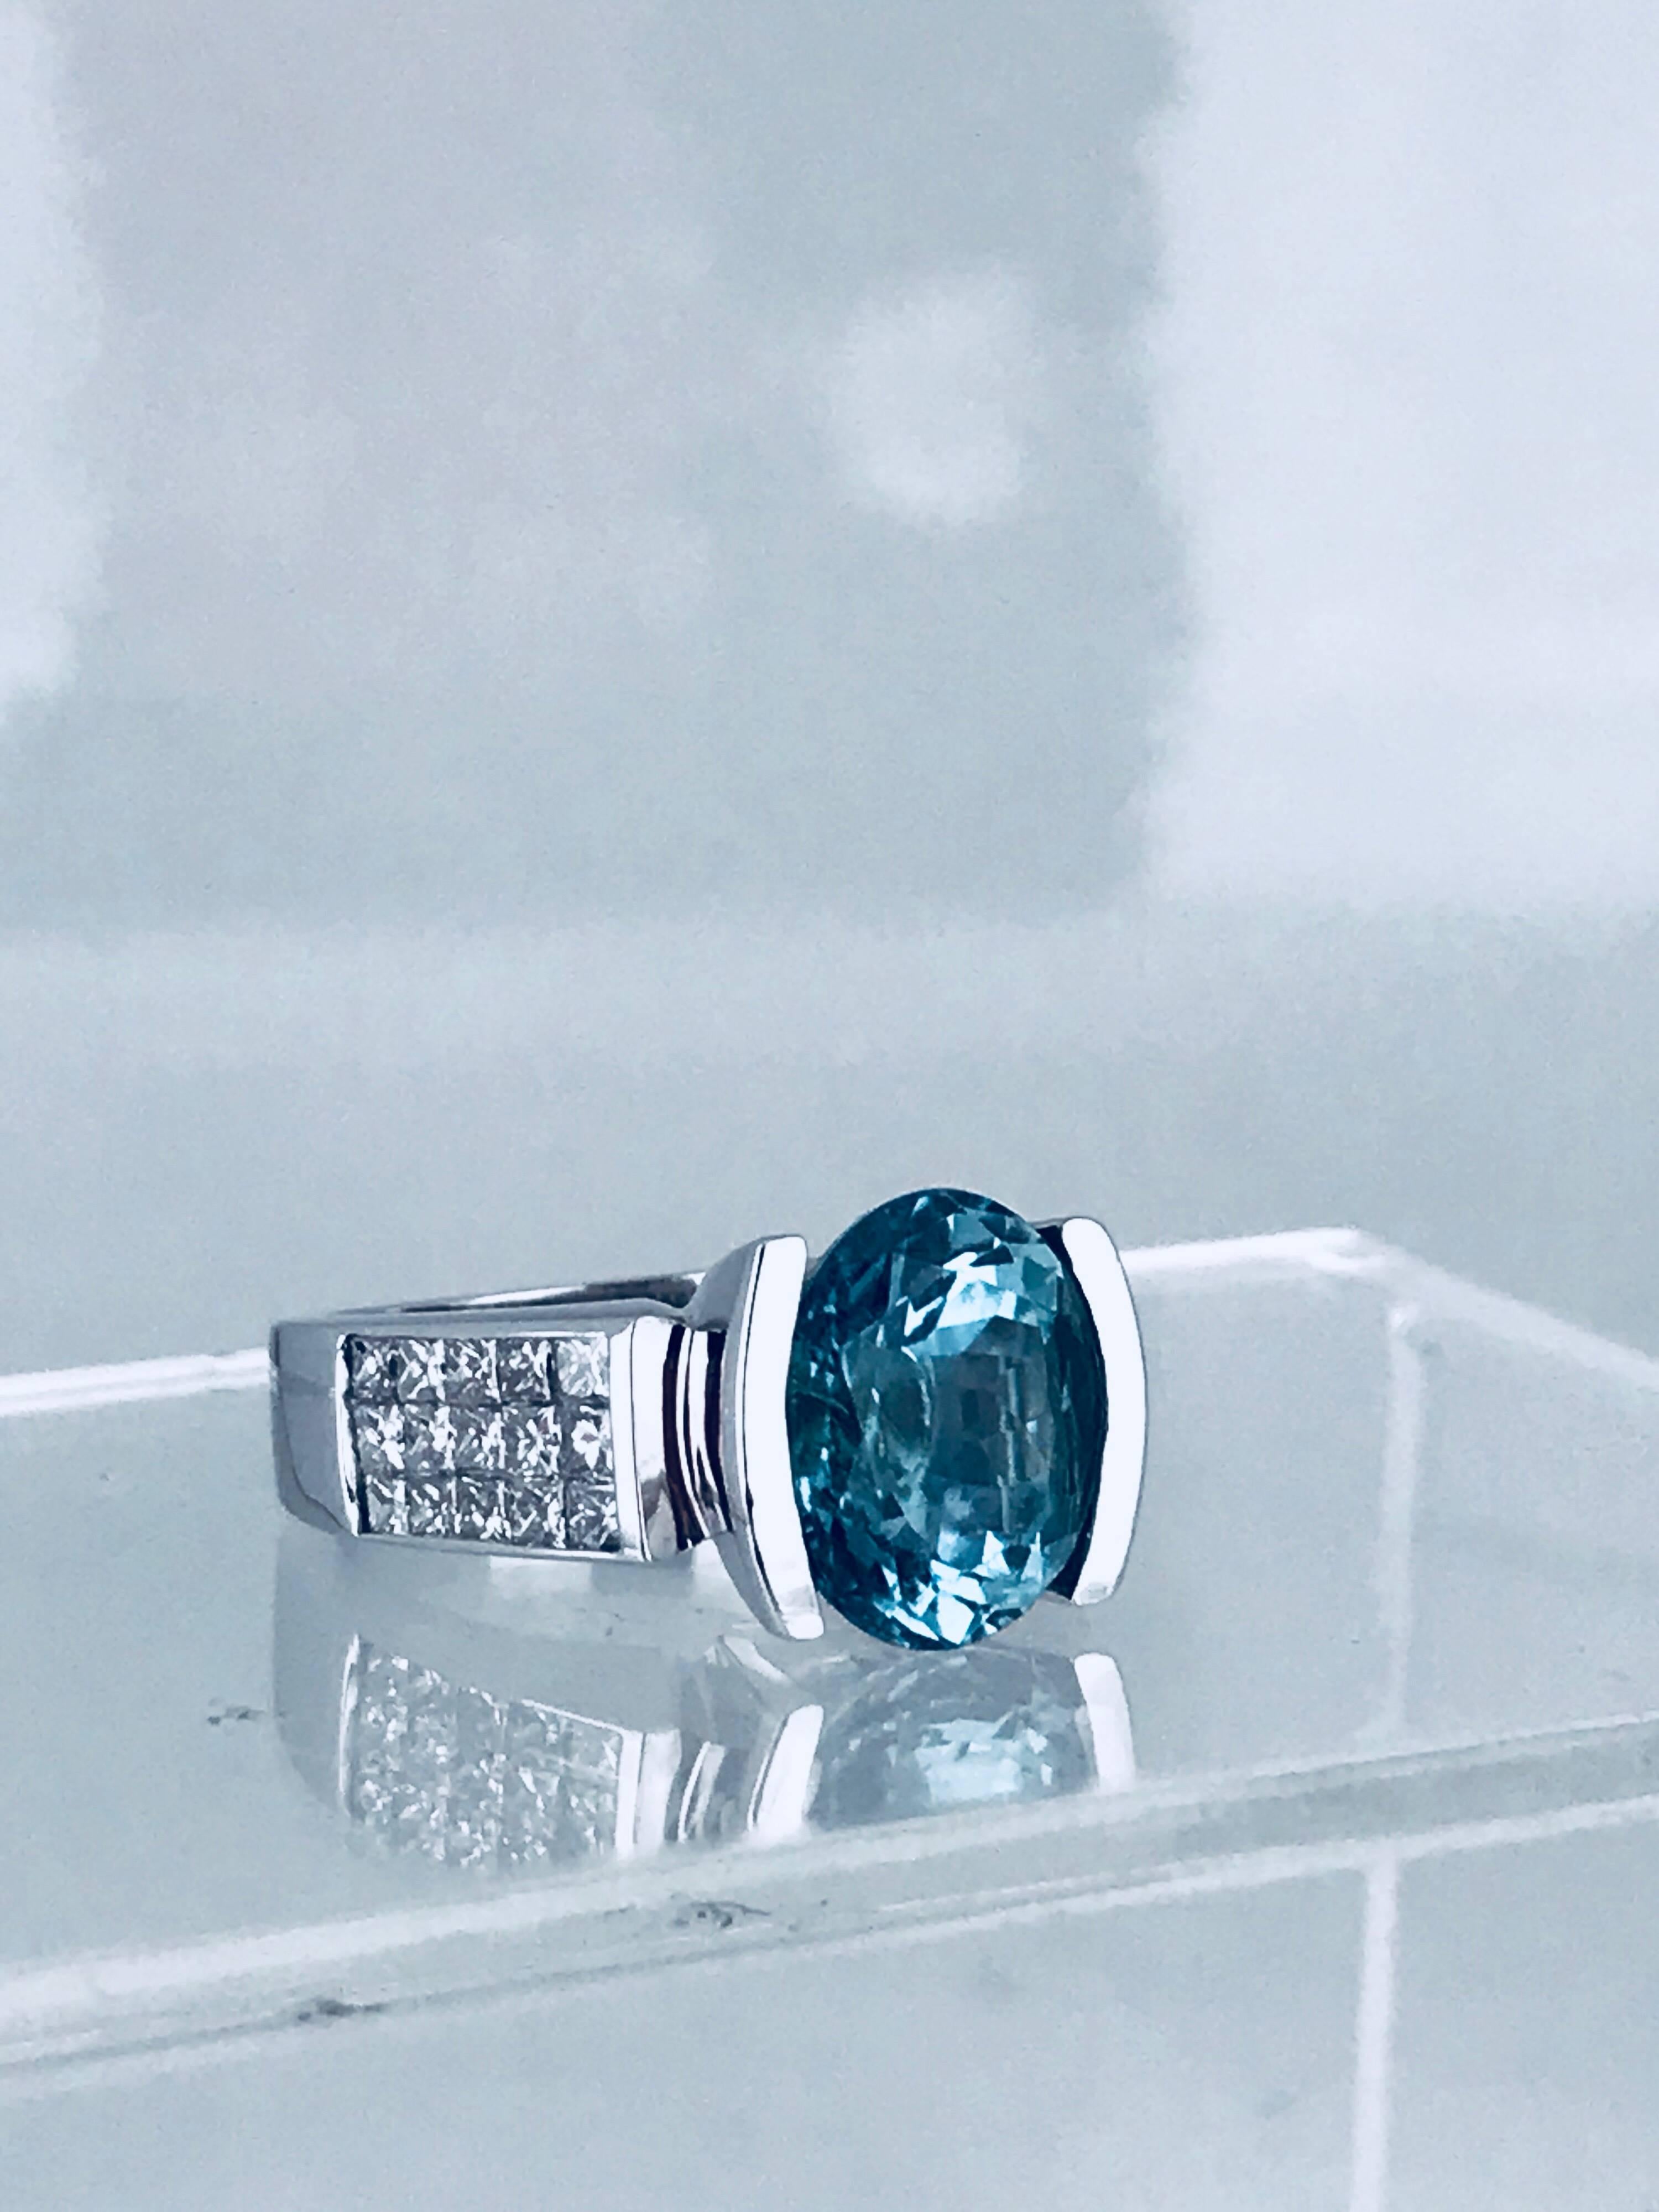 18 Karat white gold diamond and Paraiba gemstone. Rare and beautiful color weighing approximately 5.00 carats.  The measurements are 11.87-9.6 x 7.95 millimeters. 

The setting consists of (30) princess cut diamonds having a total weight of 1.05